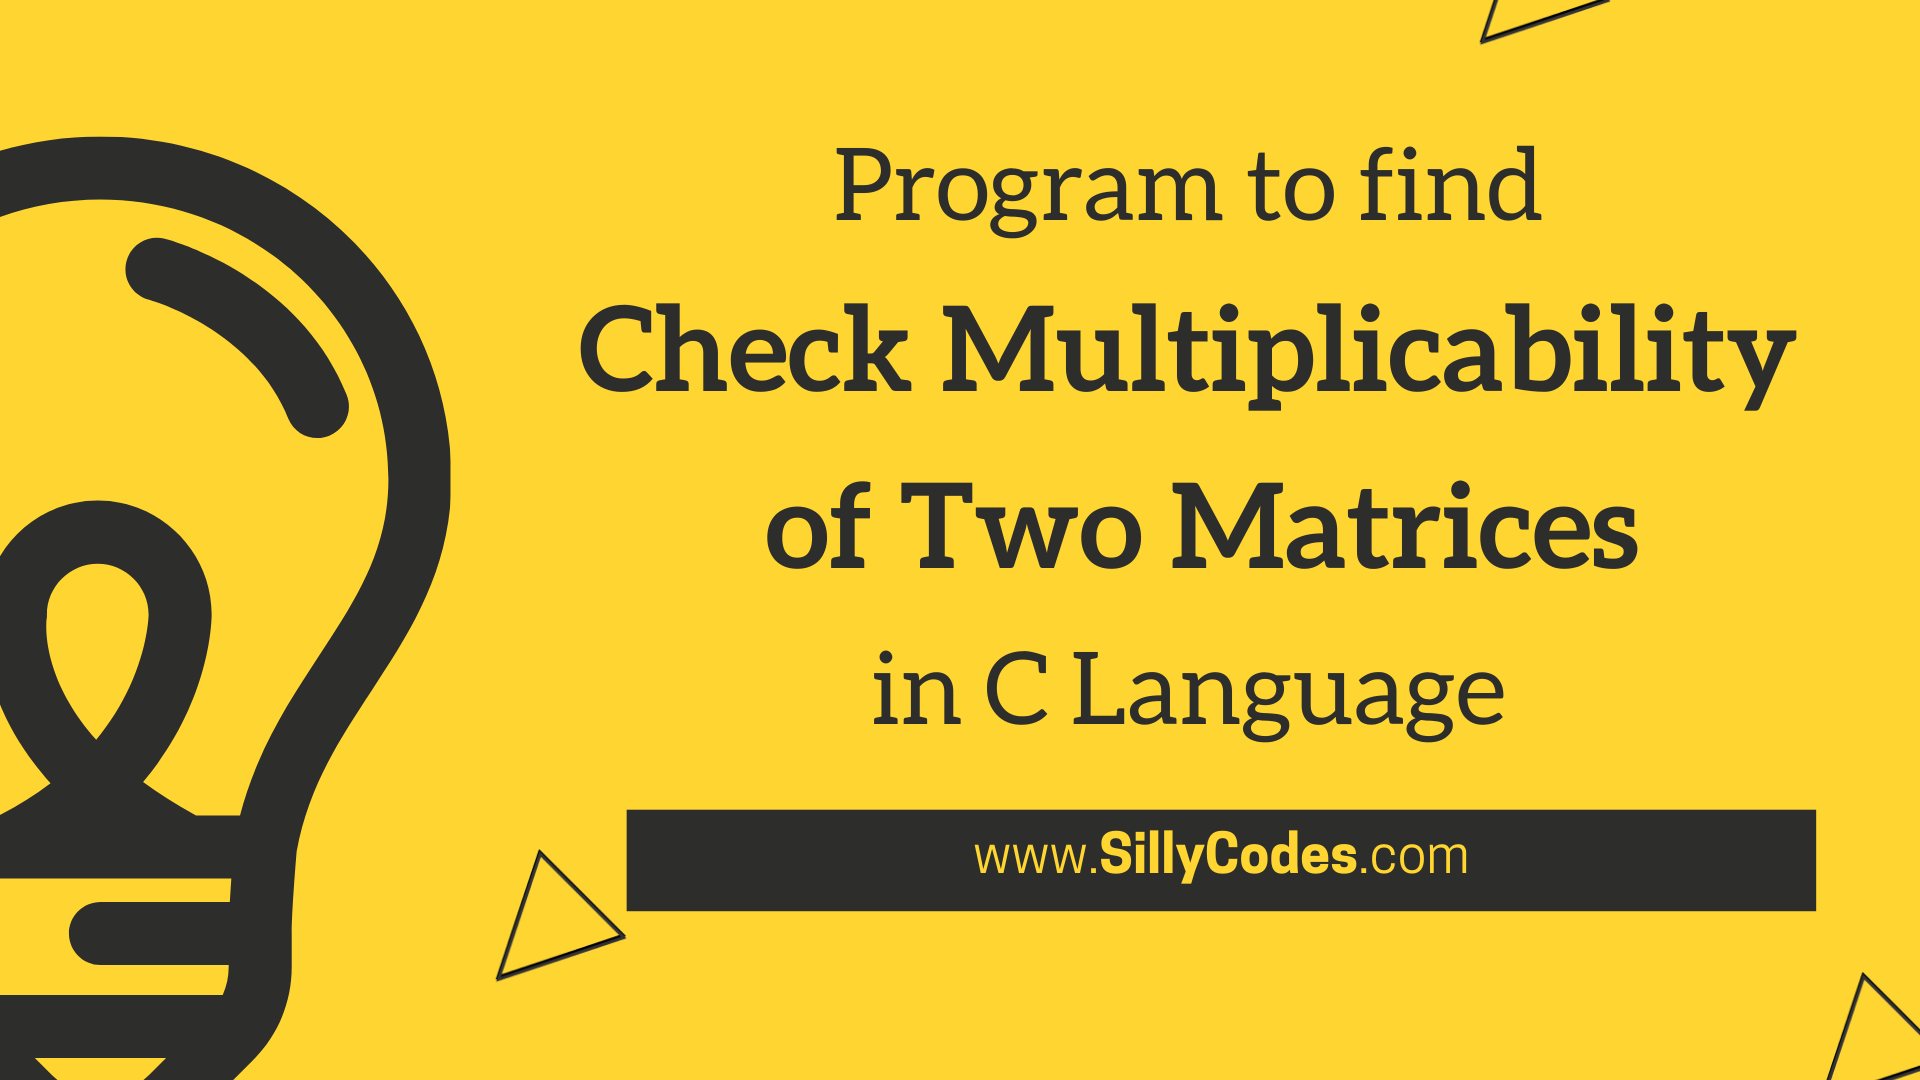 Program to Check Multiplicability of Two Matrices in C - SillyCodes